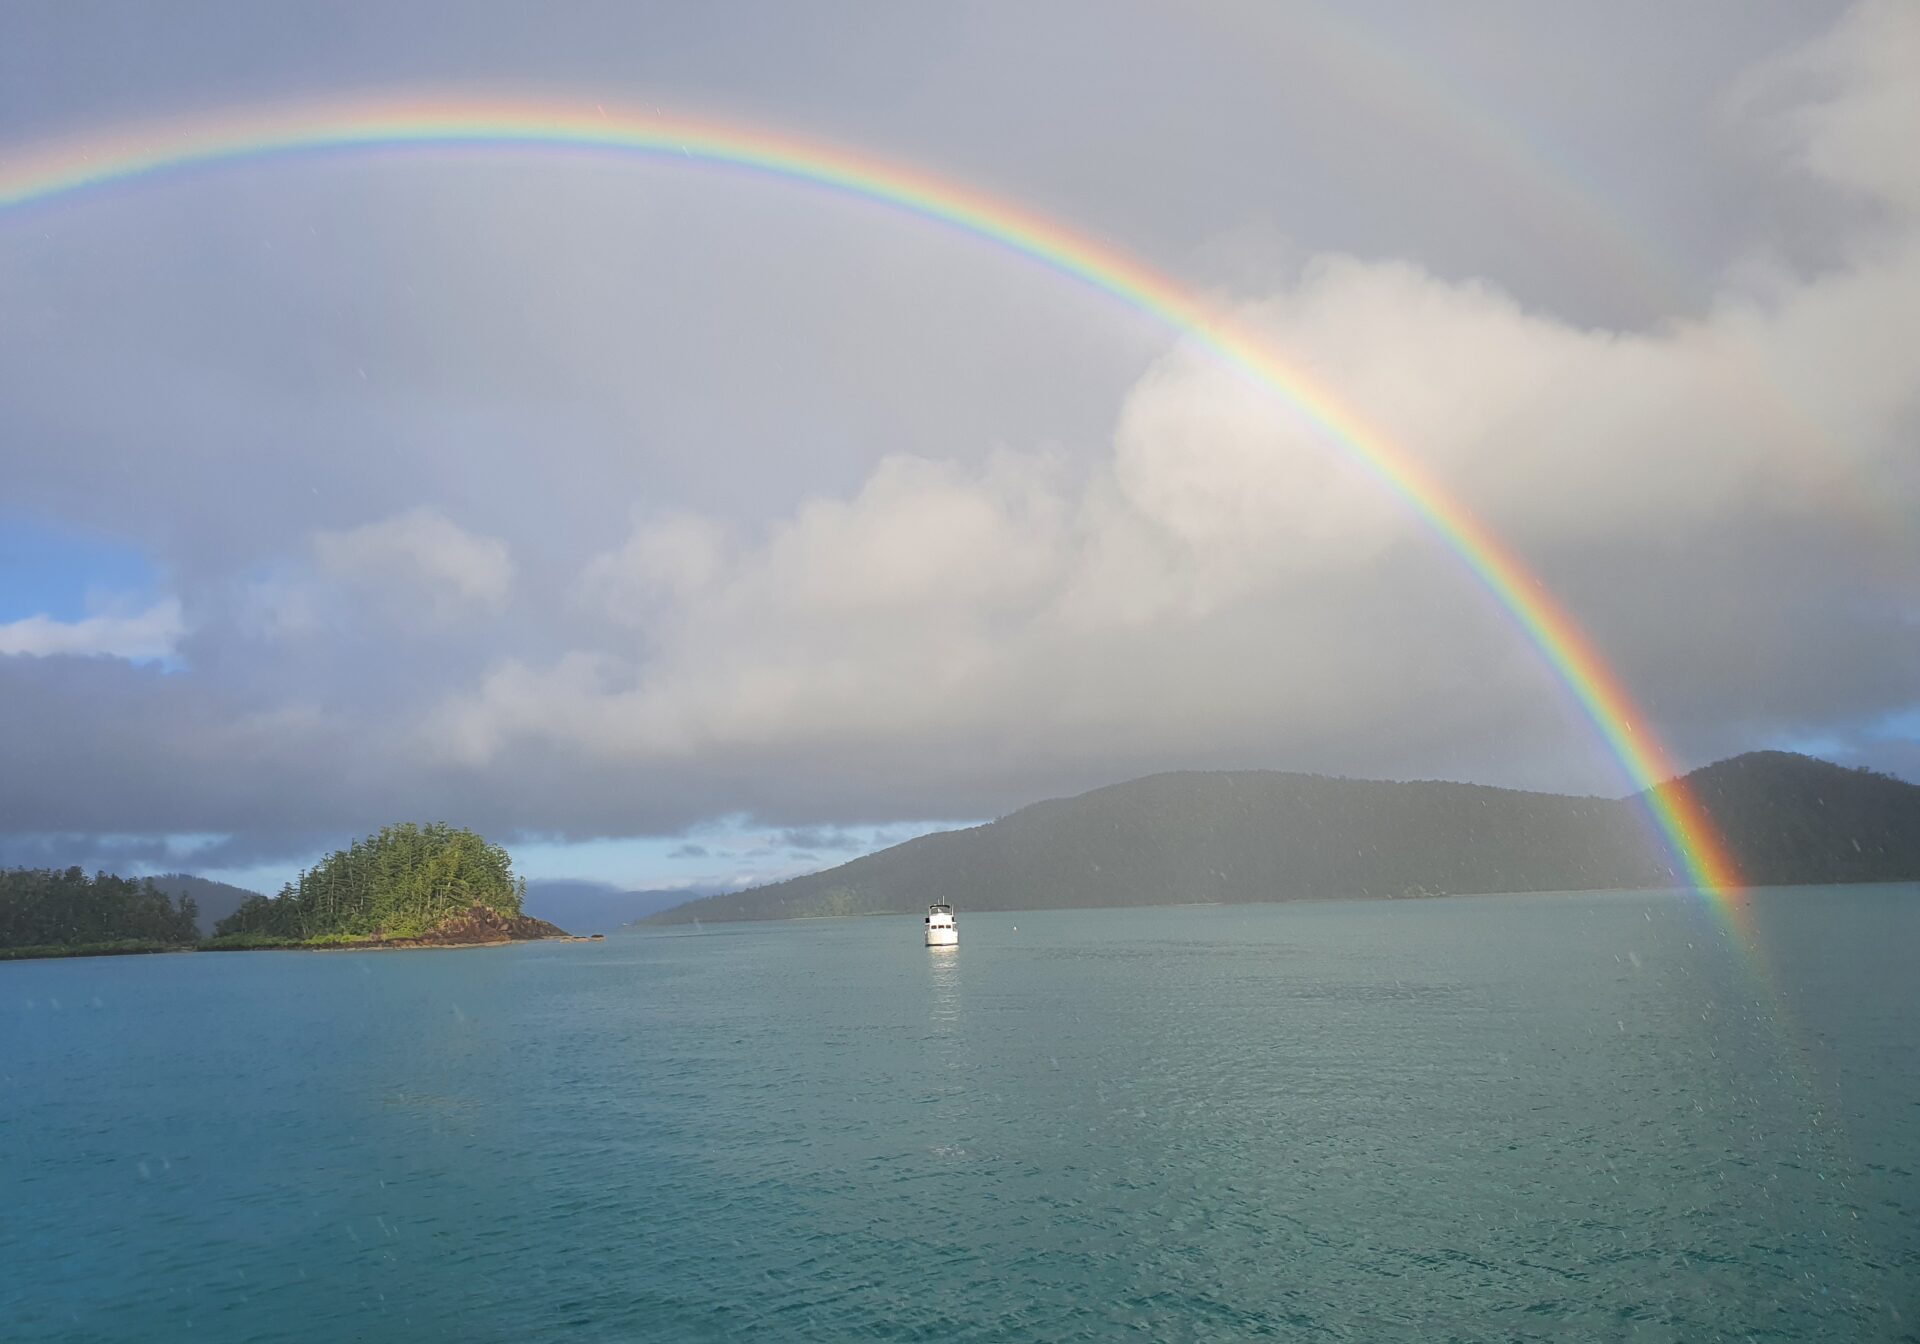 The Whitsundays even turns it on during the rainy days.